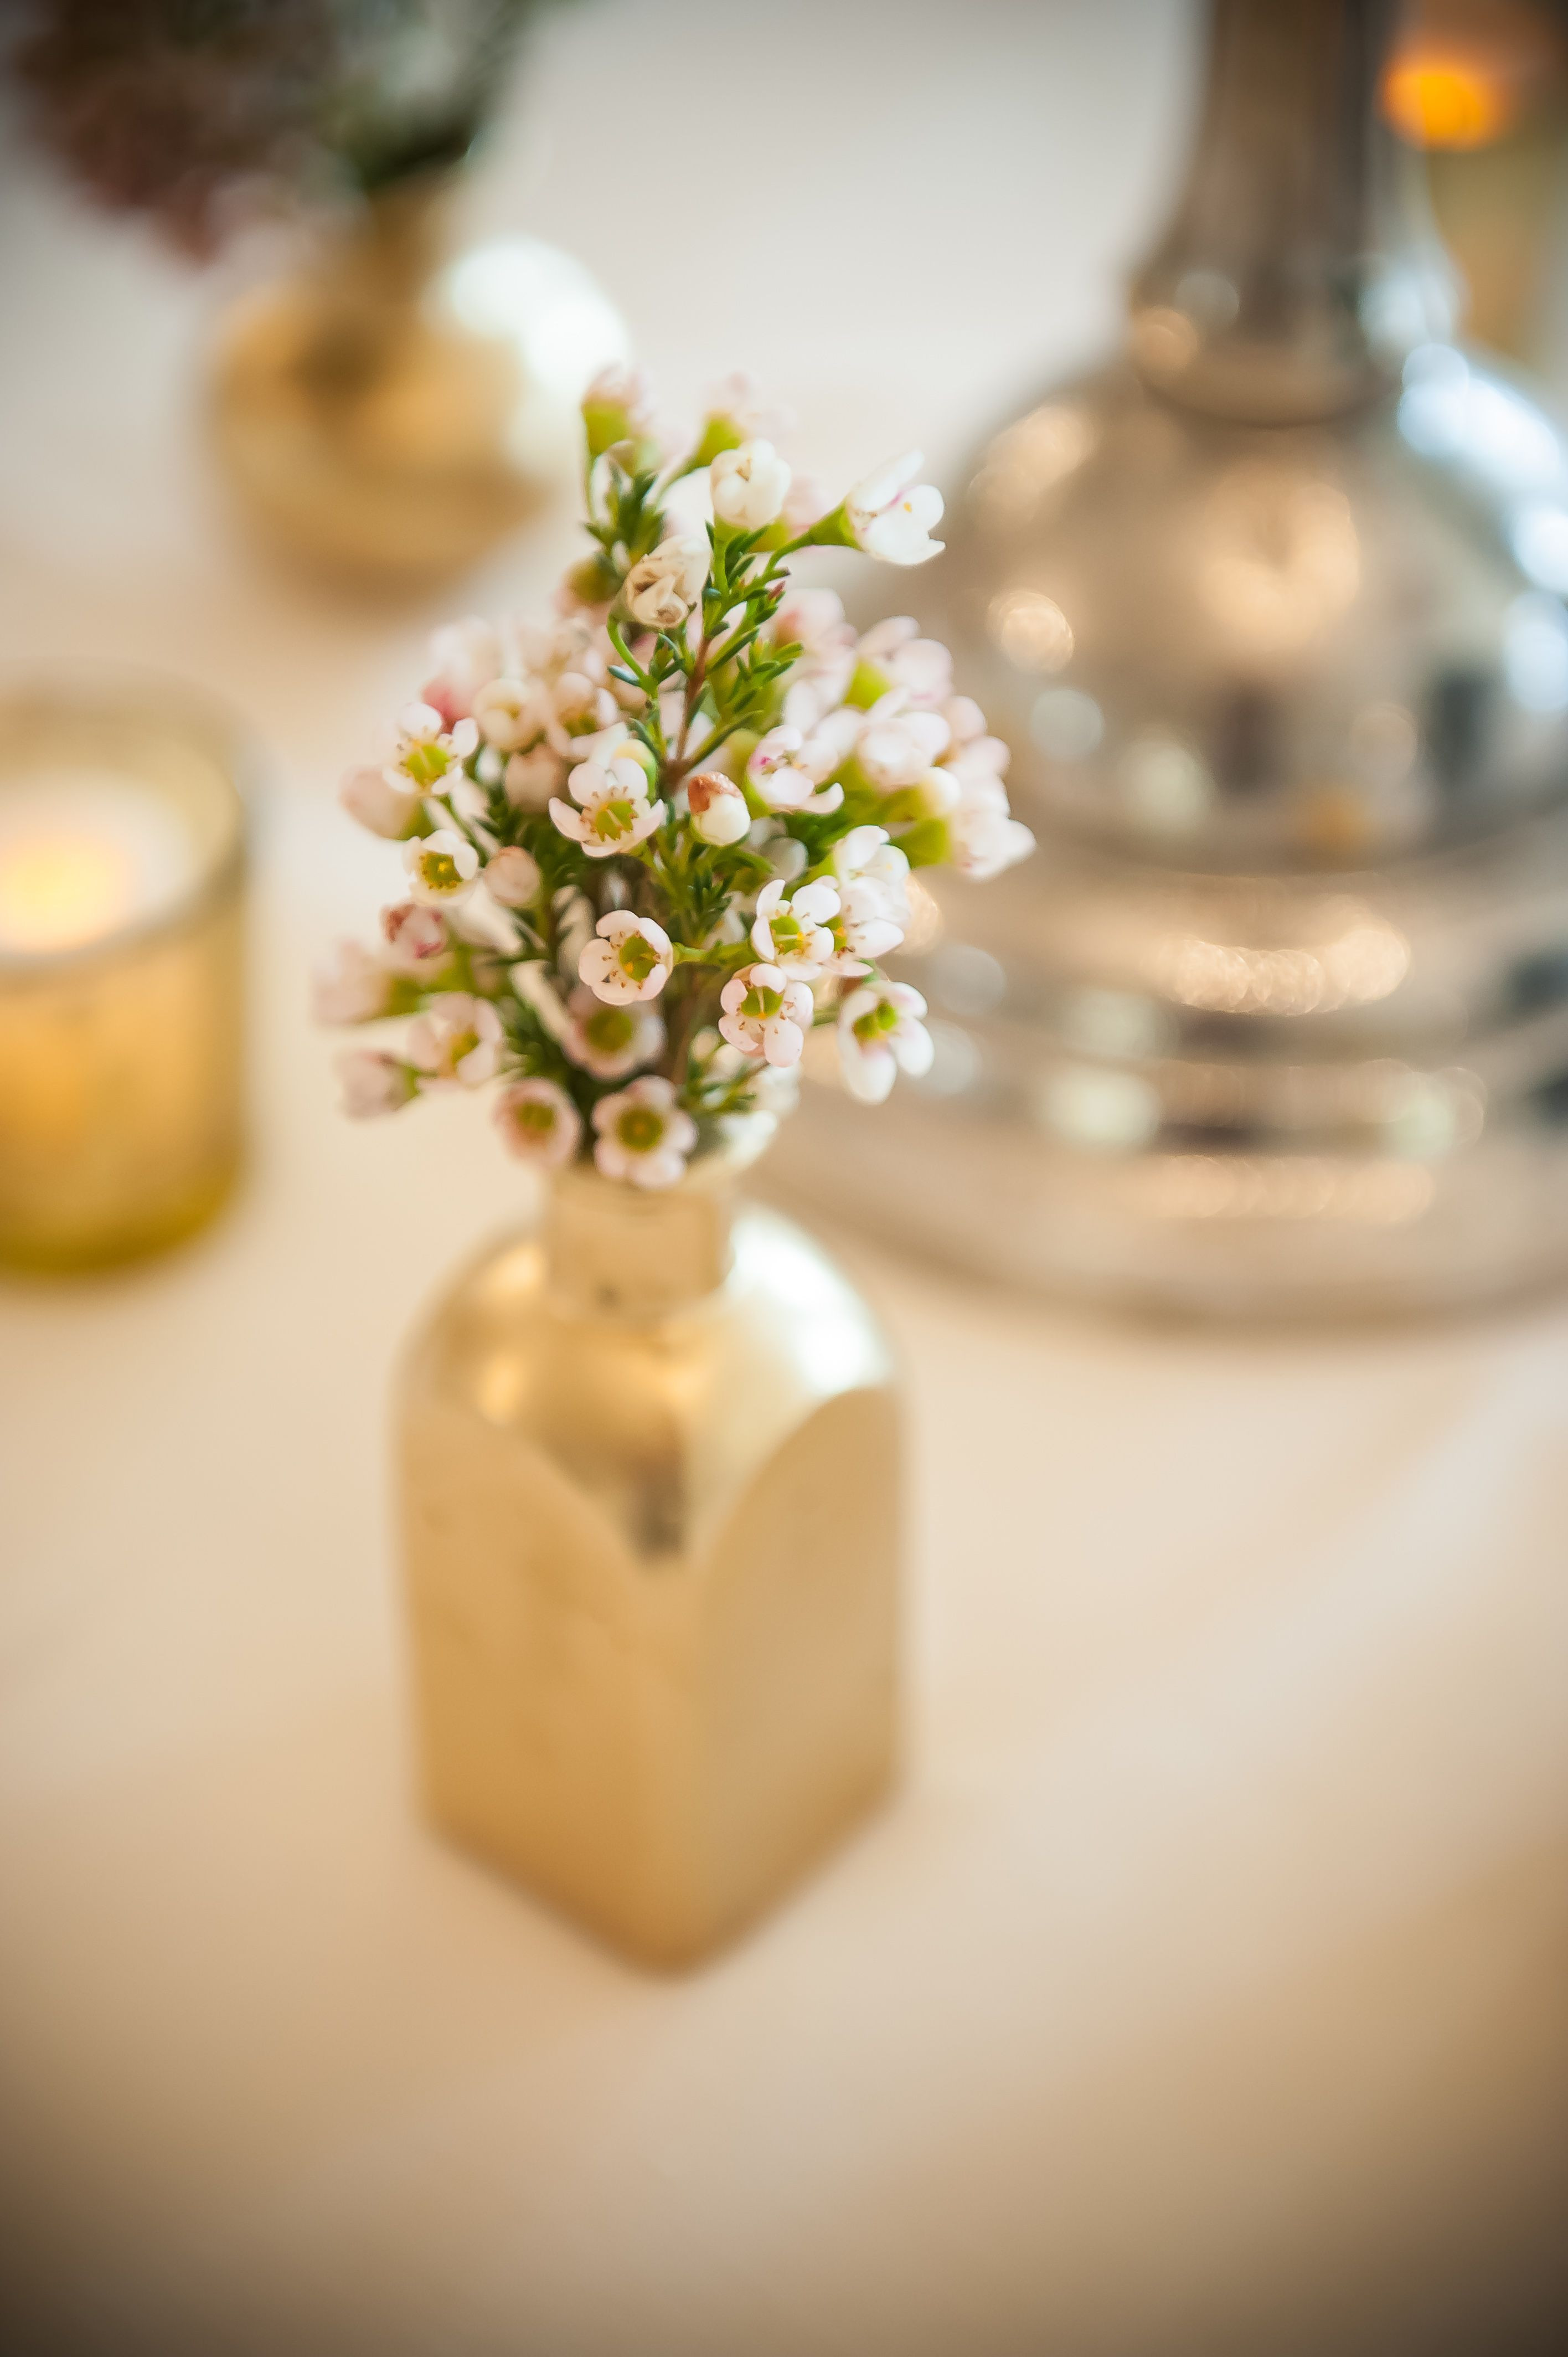 20 Cute Single Bud Vase 2024 free download single bud vase of how about little gold bud vases with white waxflowers for the pertaining to how about little gold bud vases with white waxflowers for the cocktail tables www